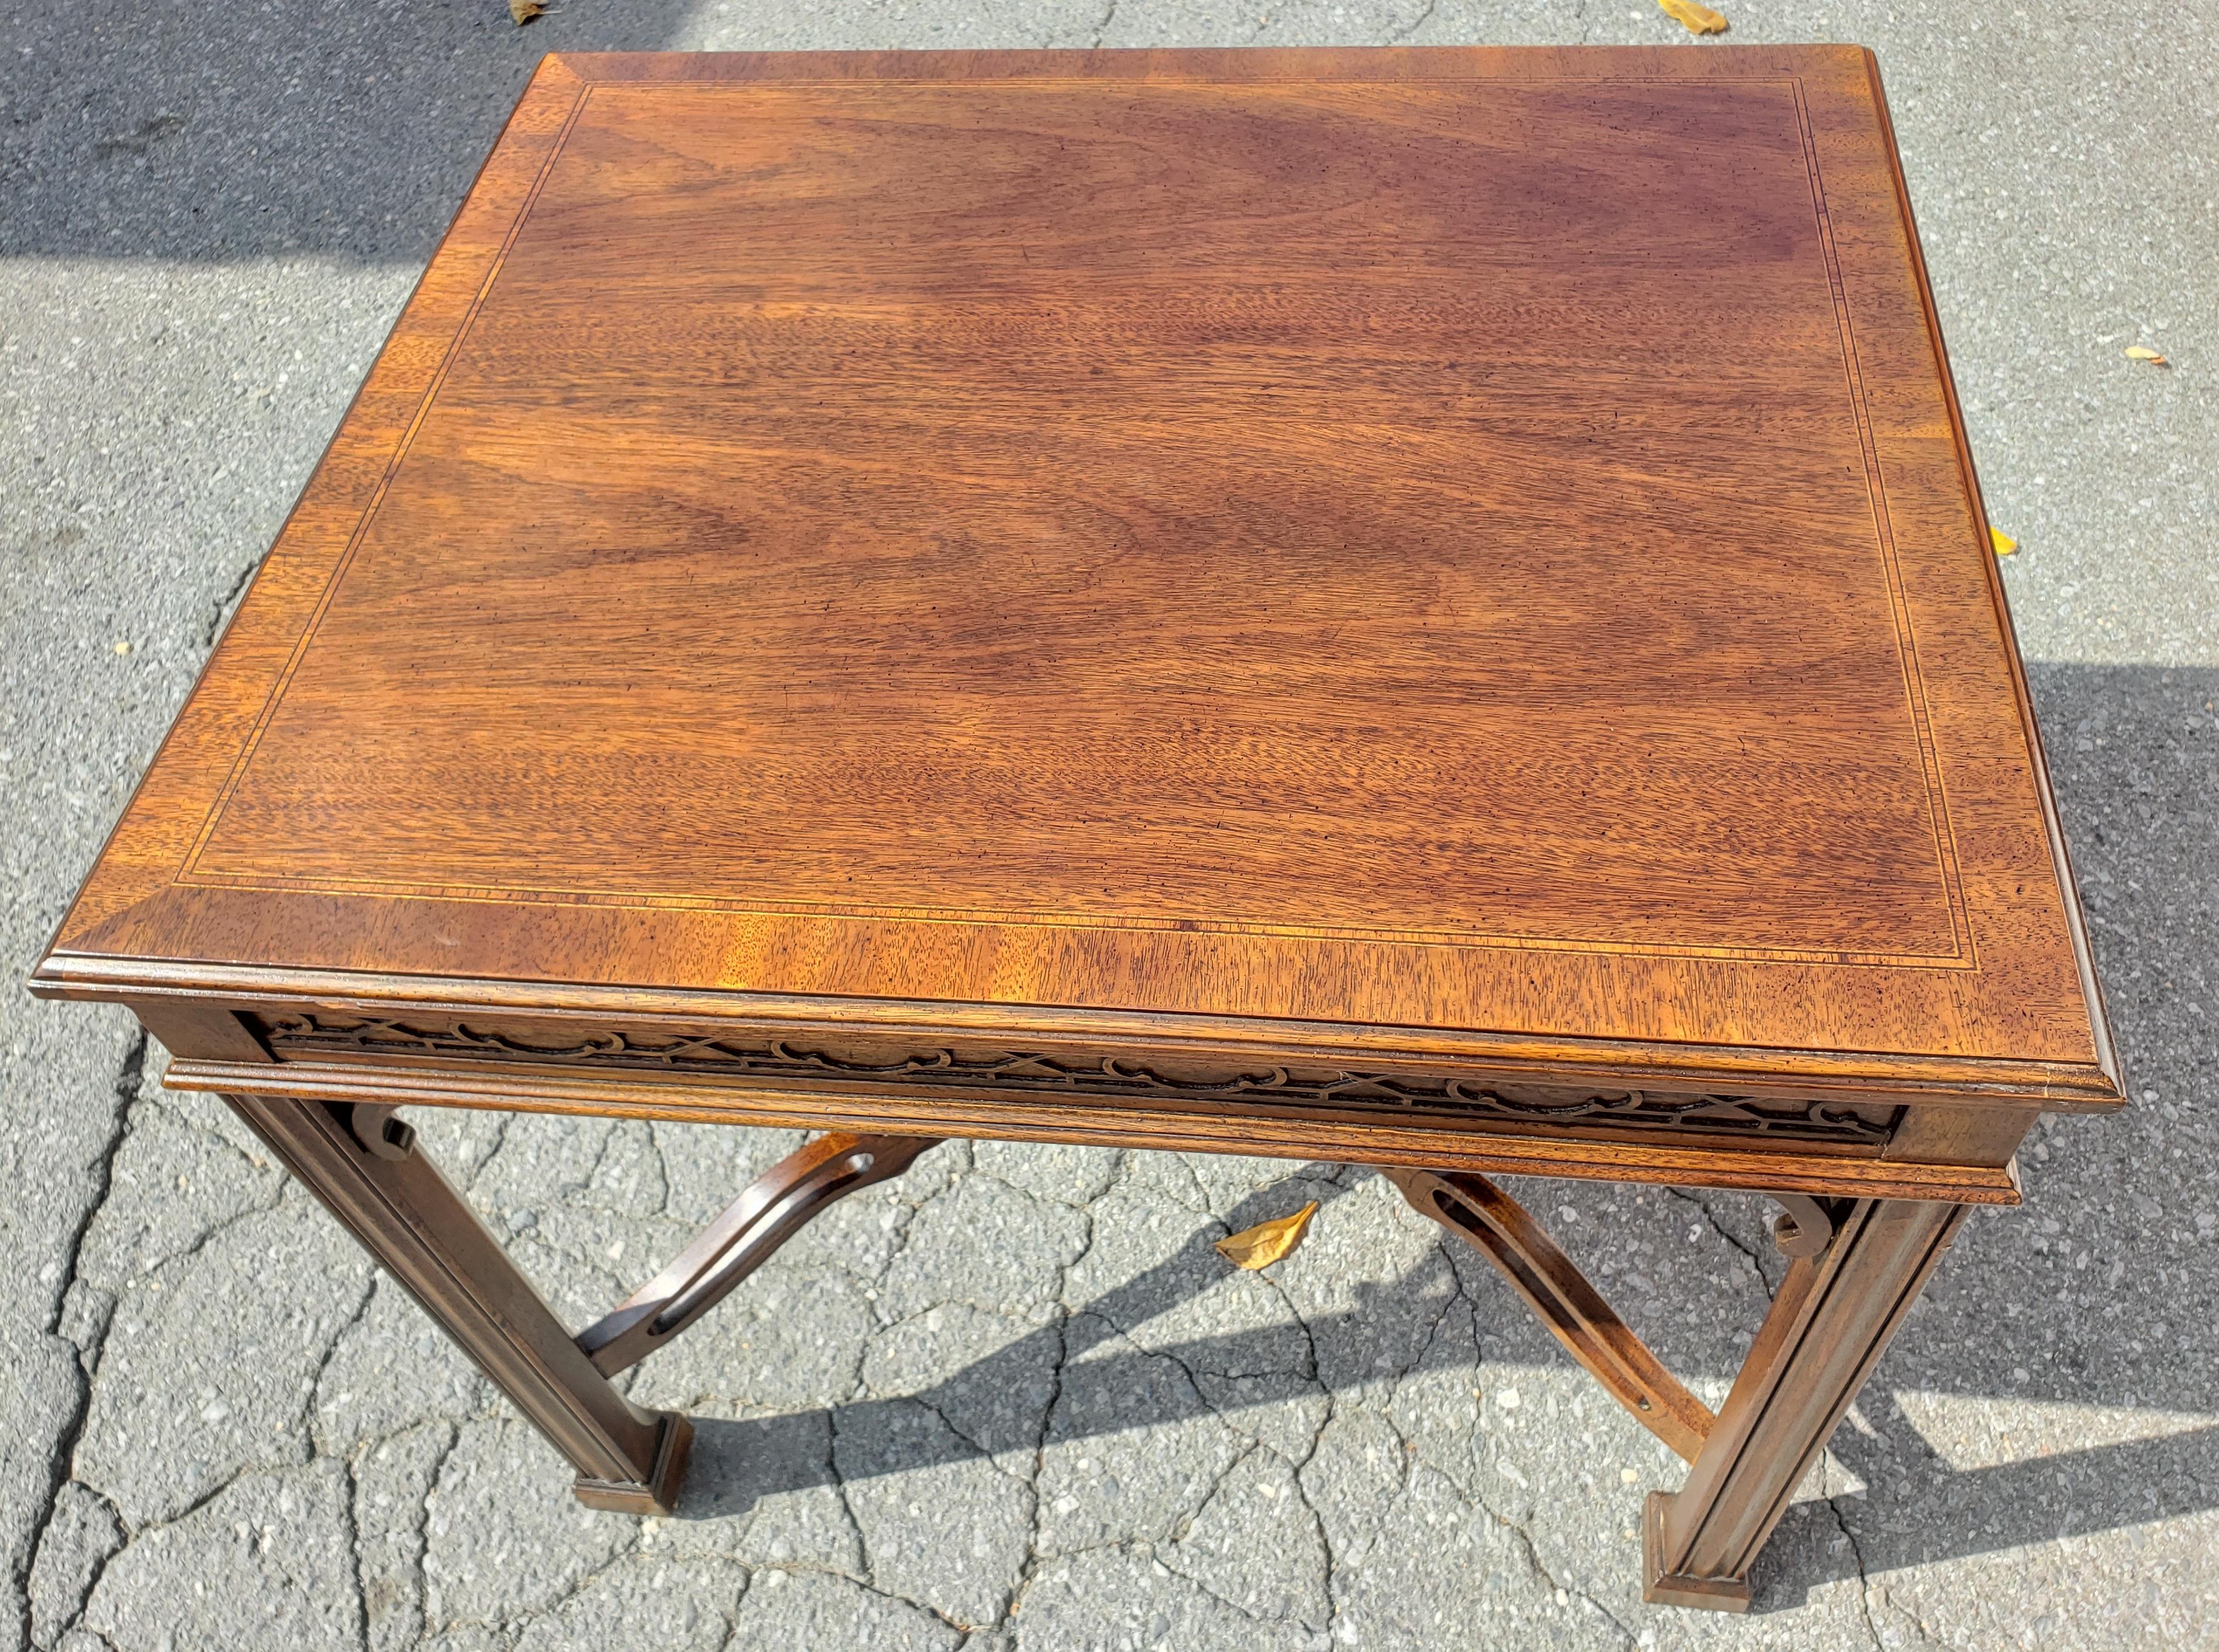 1980s Drexel Heritage Chippendale Walnut Accent Table W/ Fretwork and Banded Top For Sale 2